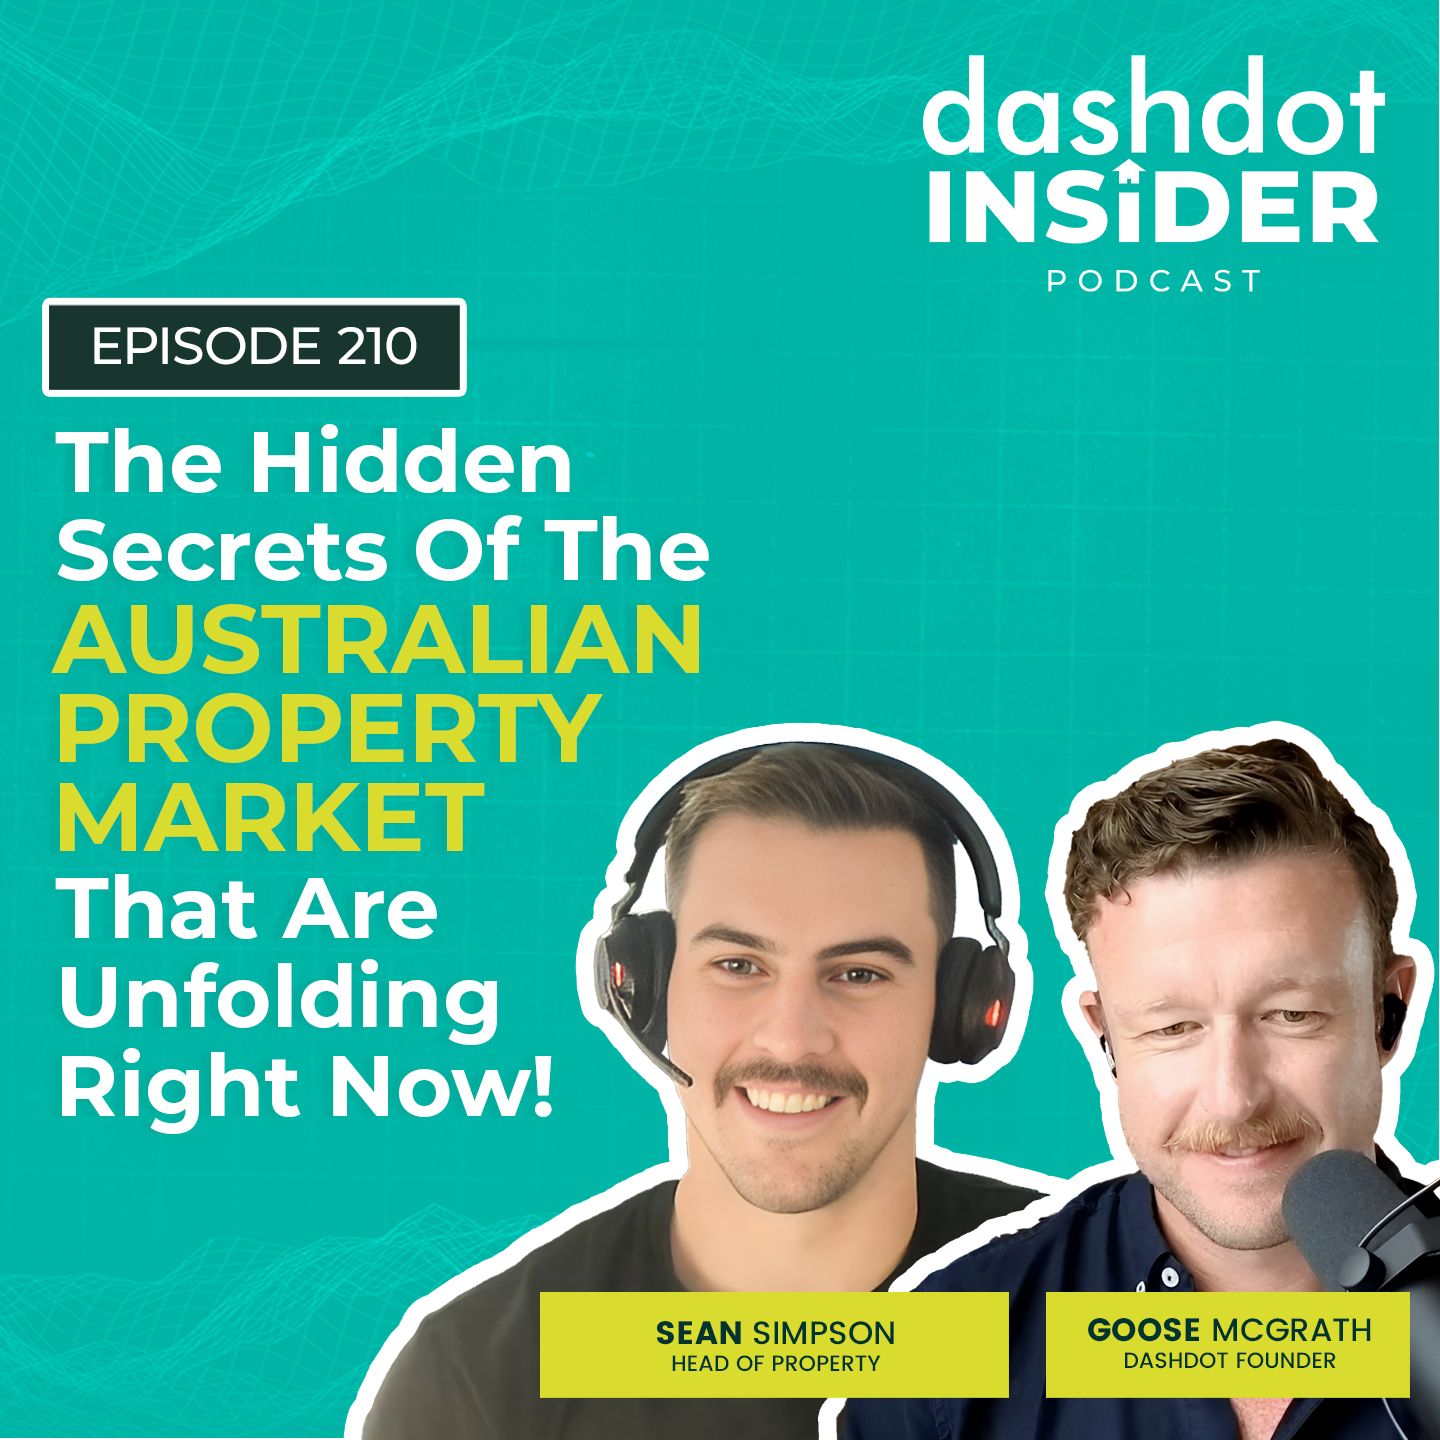 The Hidden Secrets Of The Australian Property Market That Are Unfolding Right Now! w/ Sean Simpson | #210